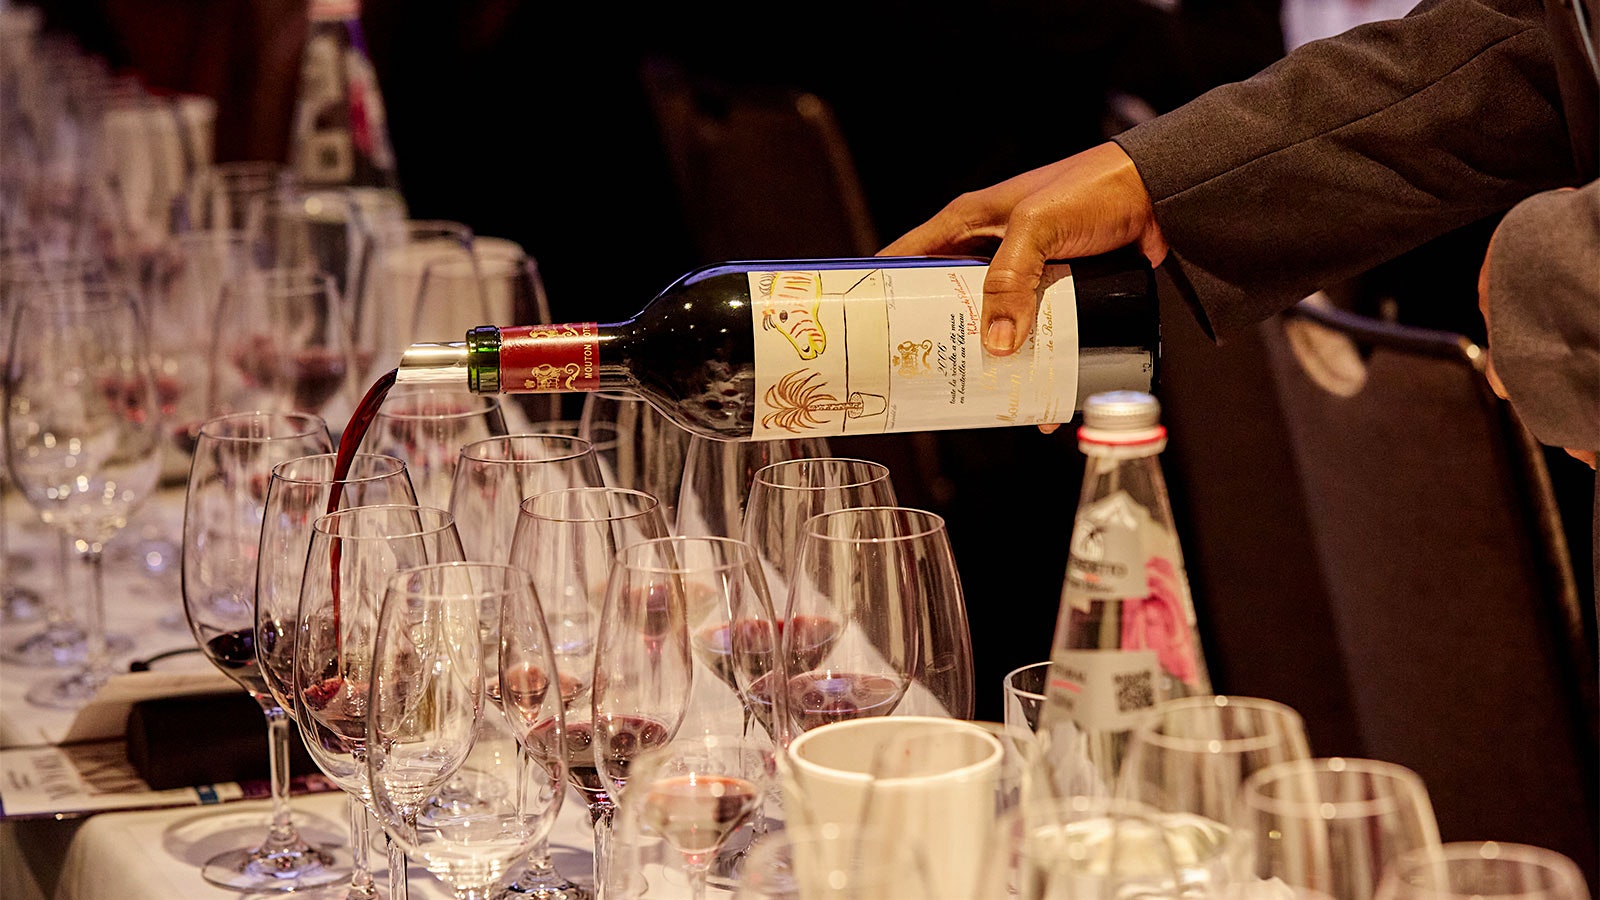     A server pours a bottle of Château Mouton-Rothschild 2006 with an artist label by Lucien Freud for a guest at the New York Wine Experience 2022